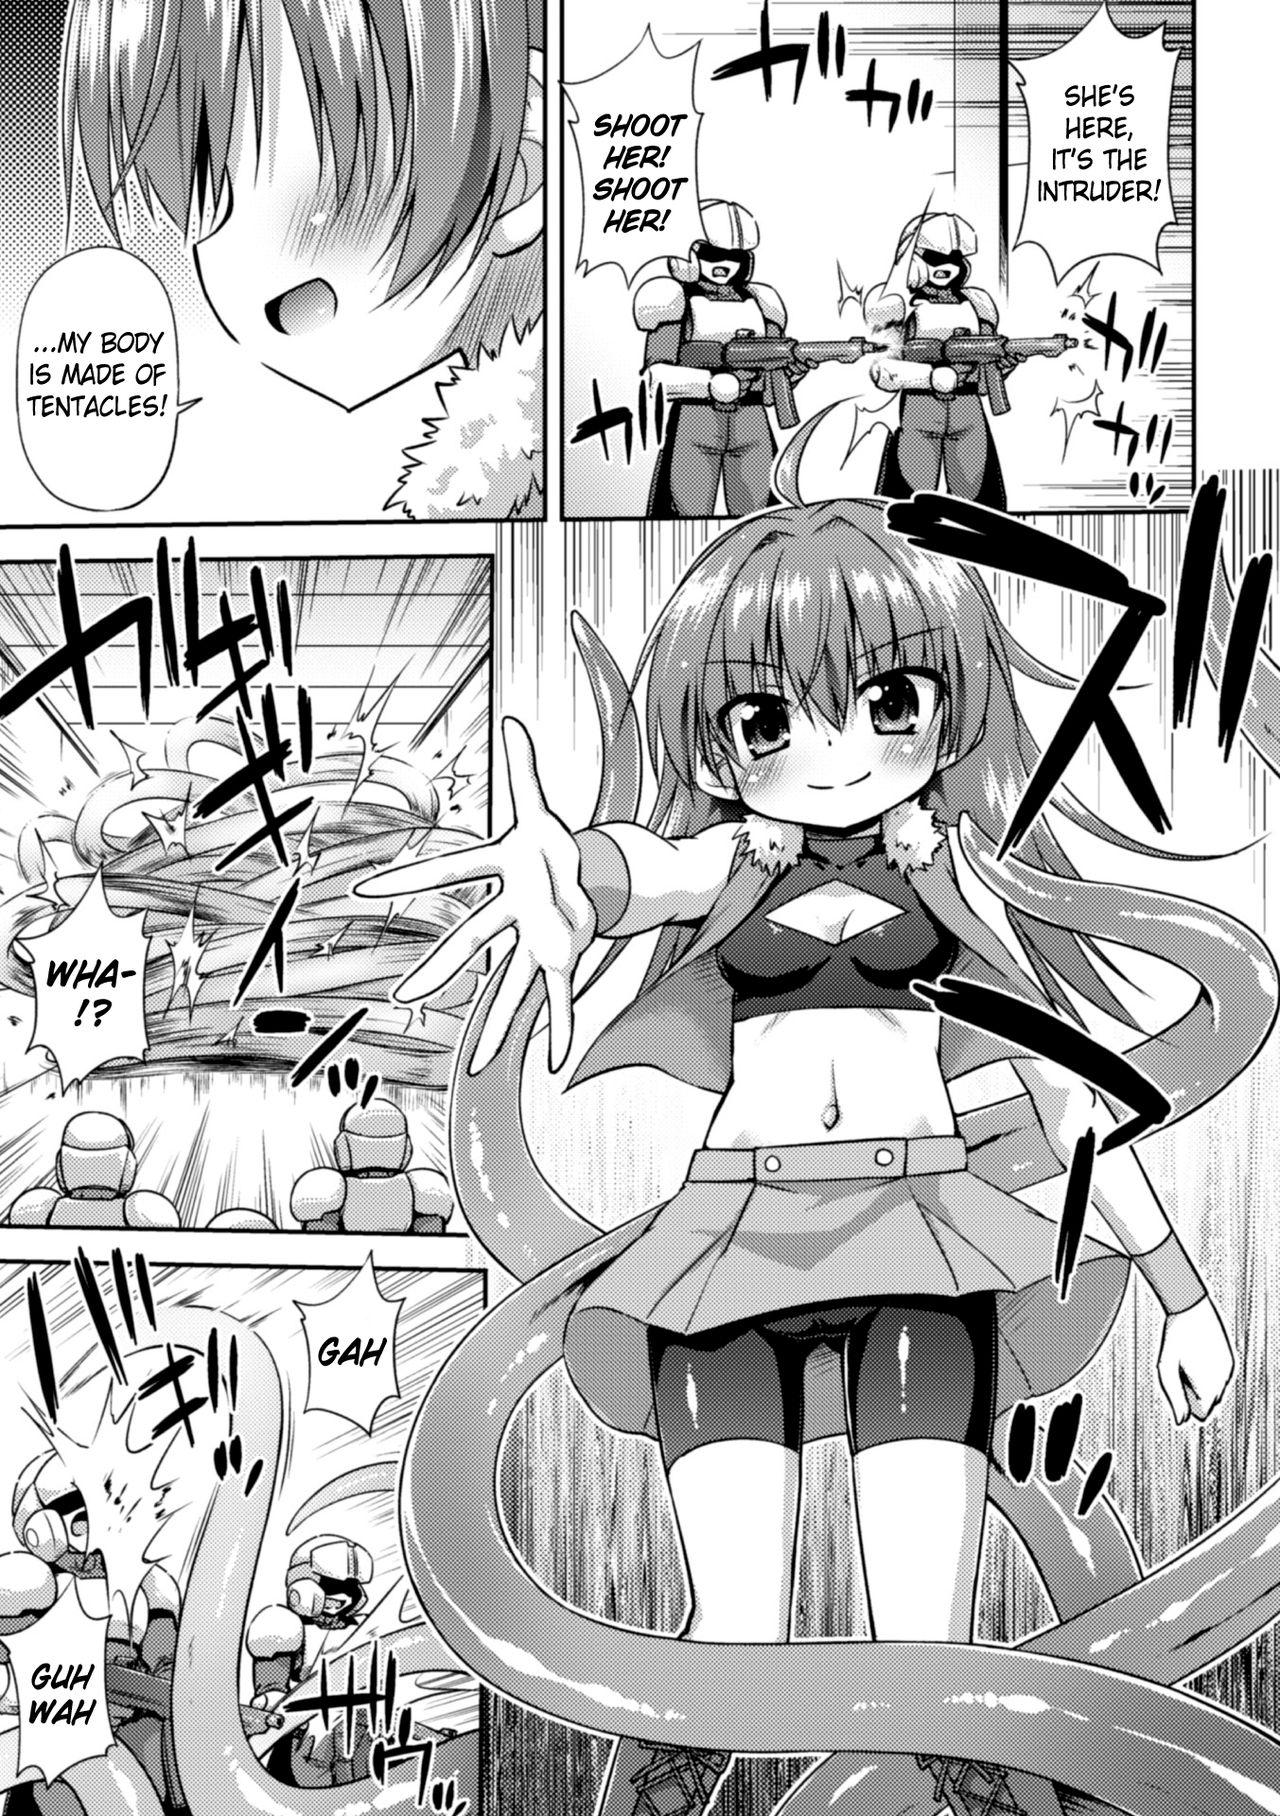 Virtual This World is all Tentacles | Konoyo wa Subete Tentacle! Fuck For Cash - Page 5